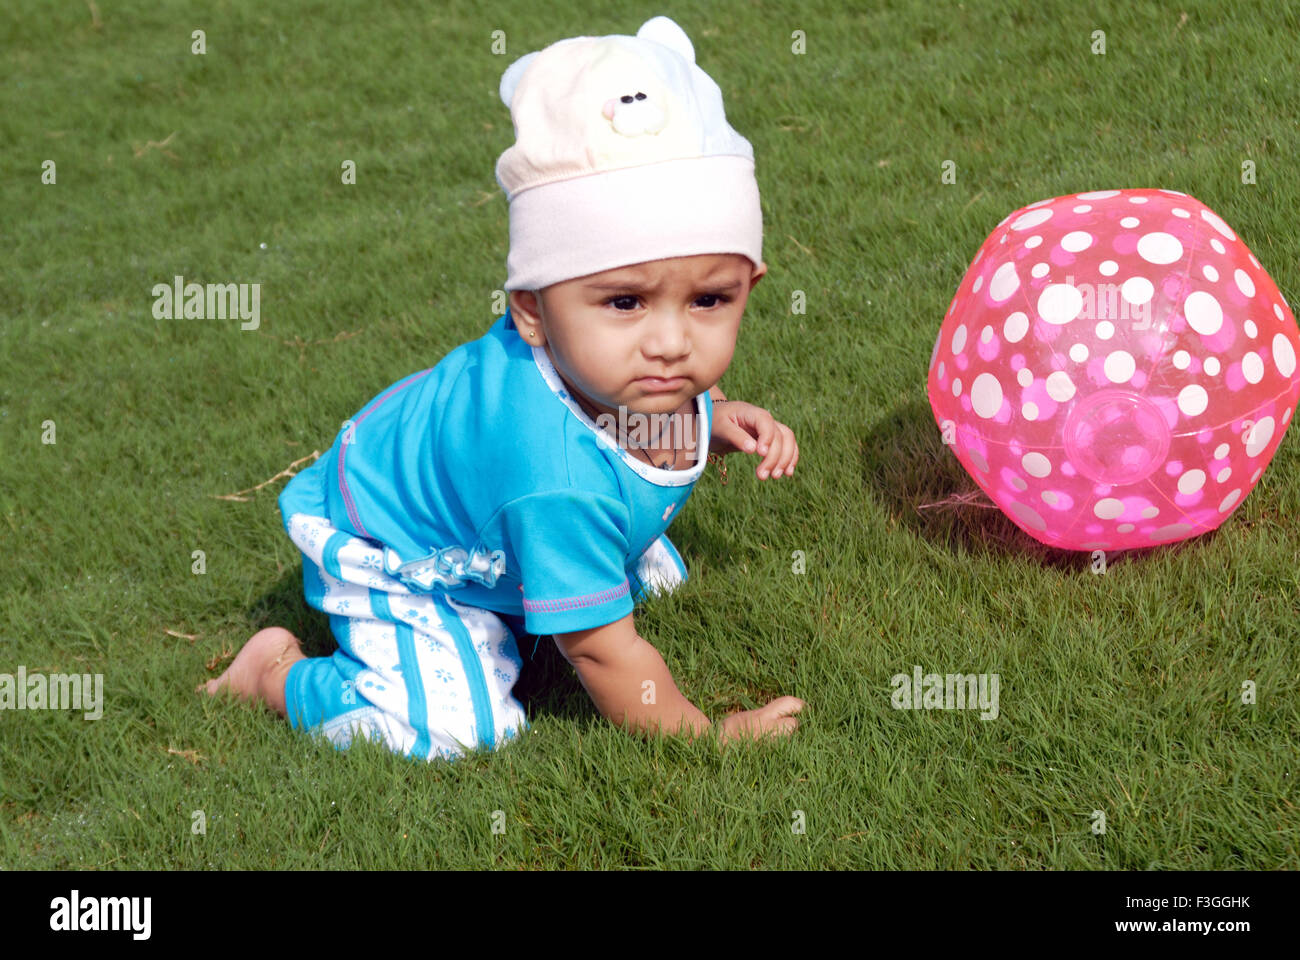 Baby crawling wearing white cap in blue dress playing with pink plastic ball on green grass MRr#152 Stock Photo